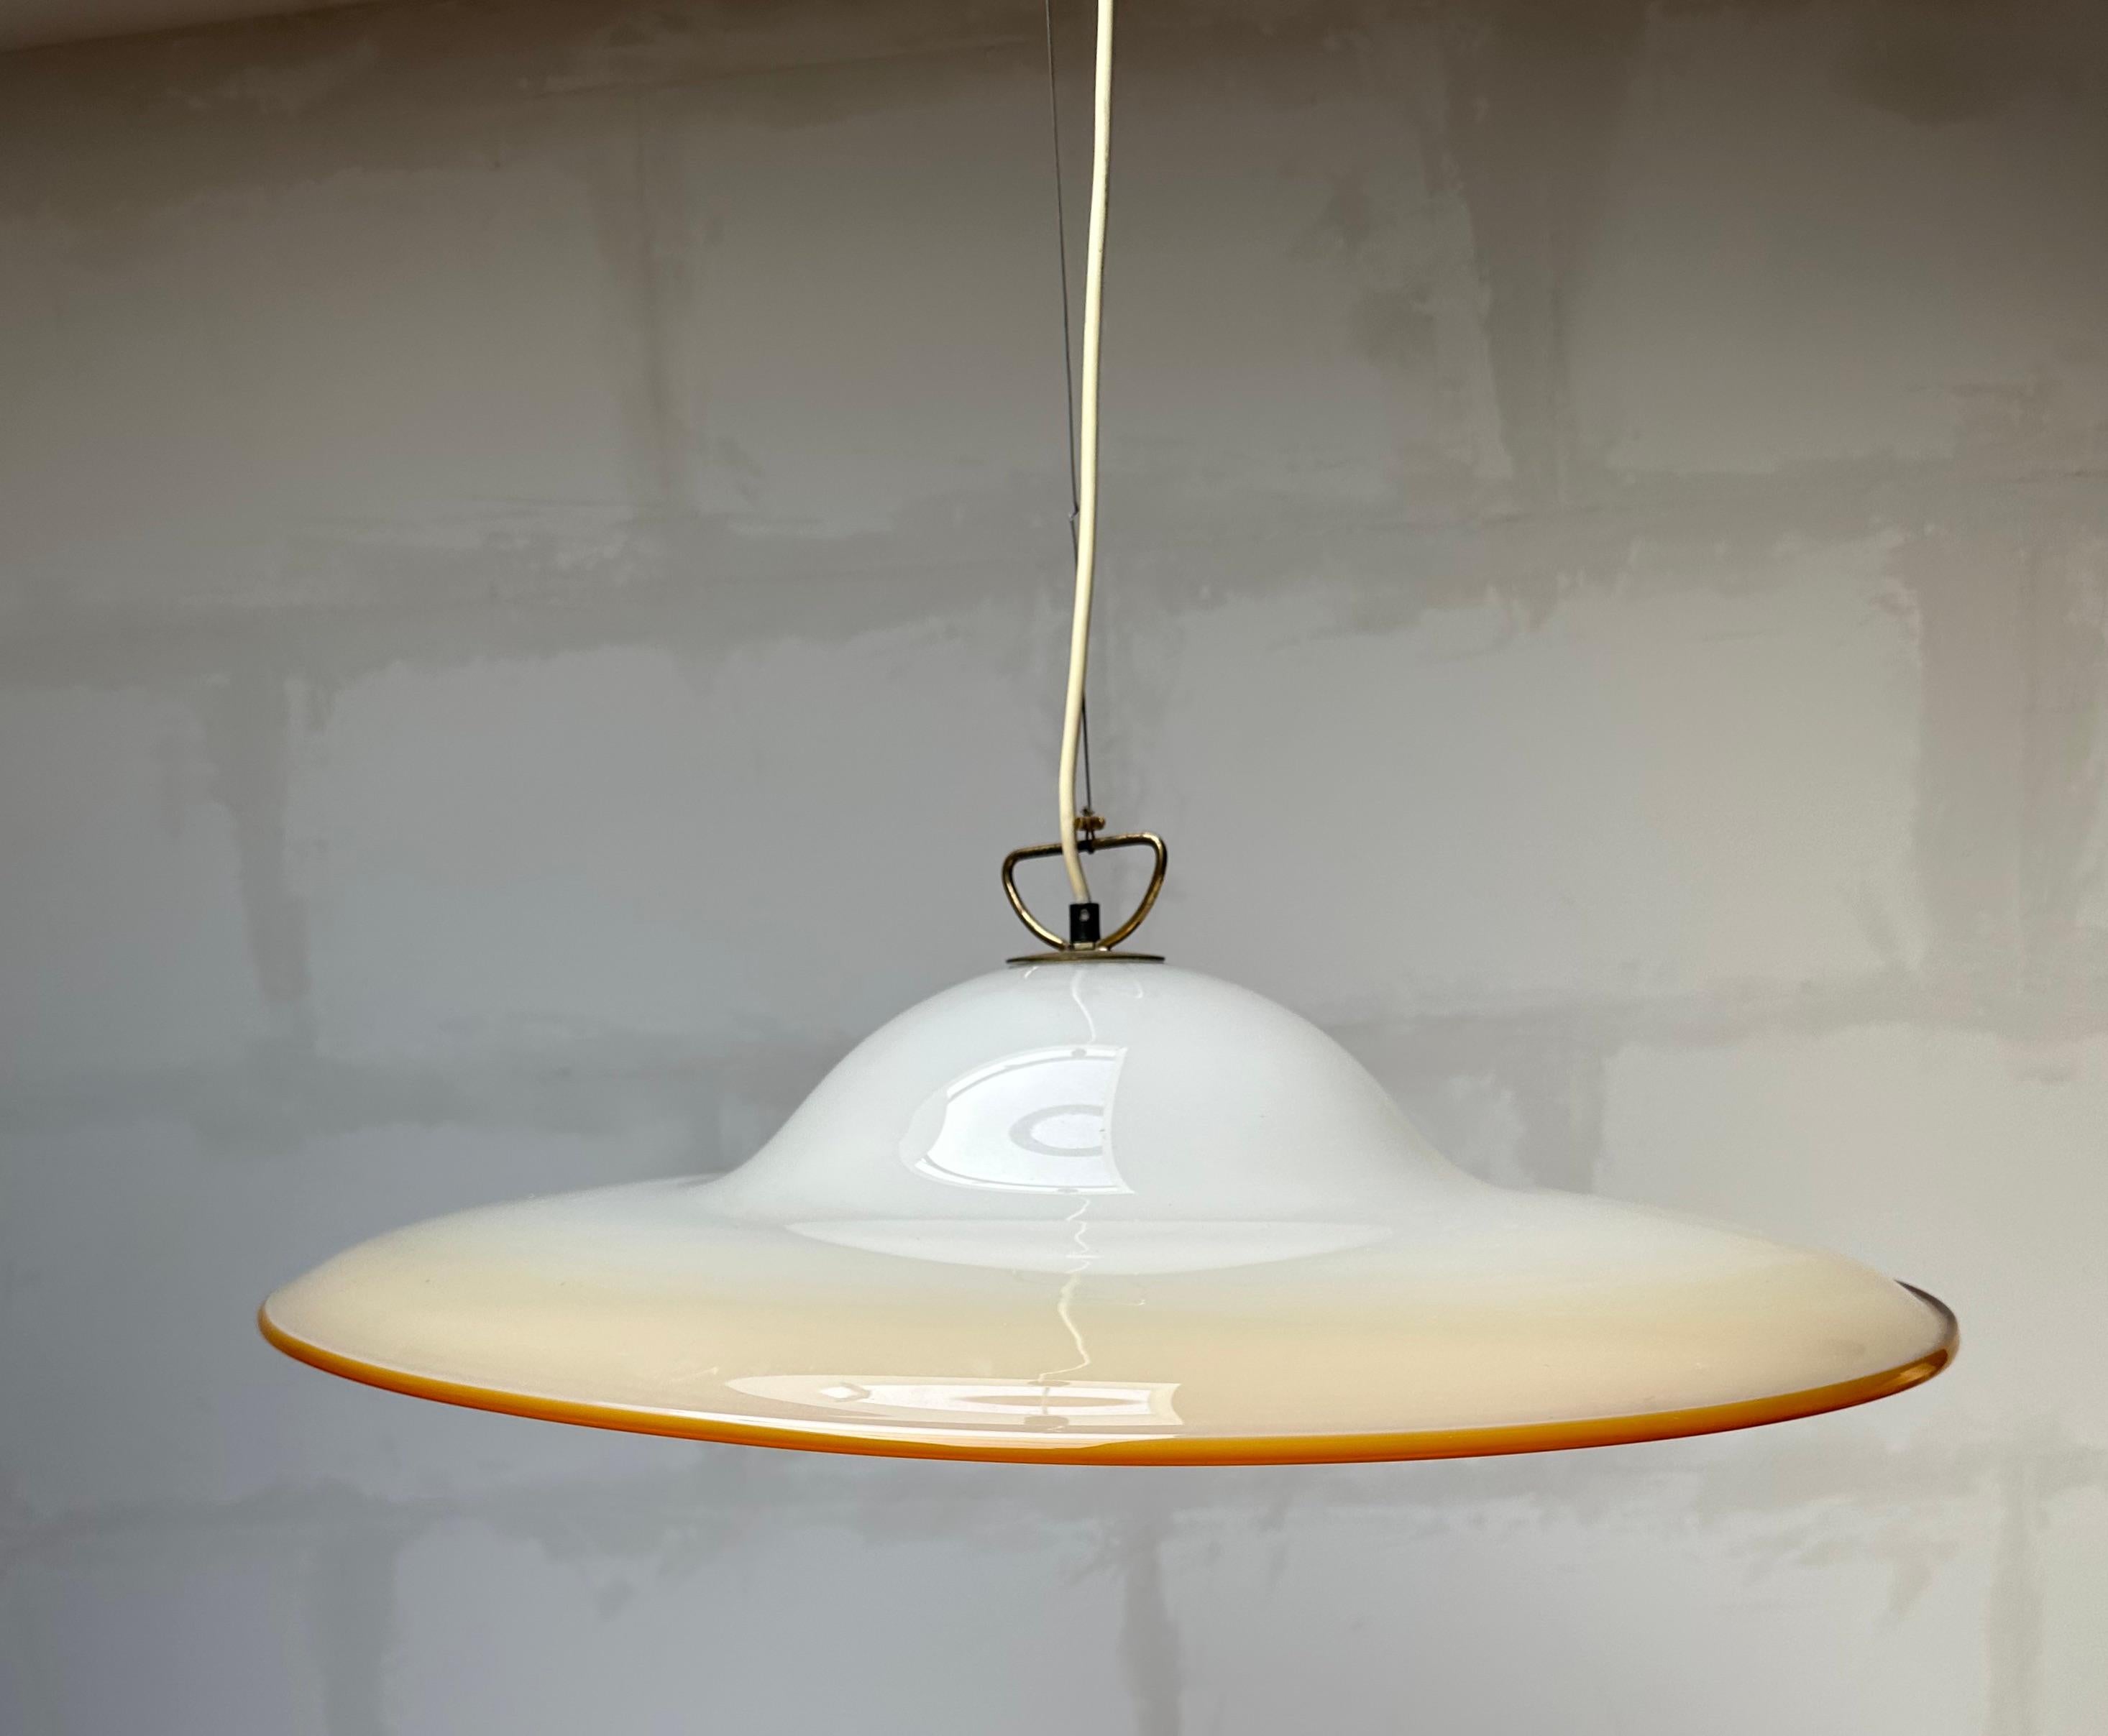 Great shape, mouthblown Venetian light fixture by Seguso.

If you are looking for a rare and stylish mid-20th century fixture to grace your home then this handcrafted Italian light could be perfect. One person might see an upside down vortex of